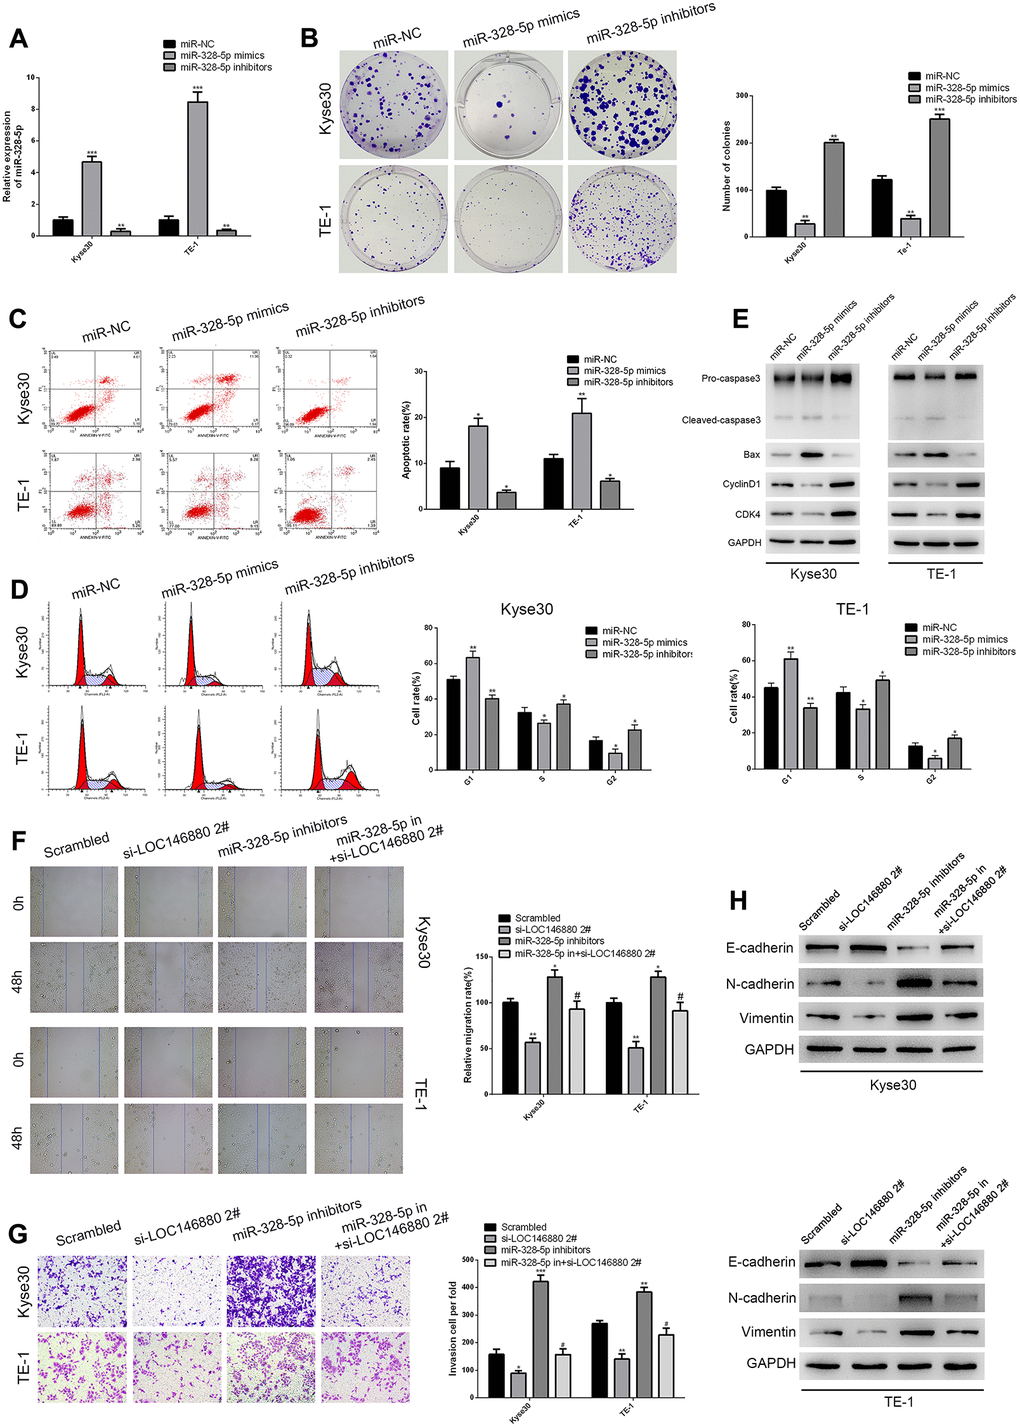 MiR-328-5p functions as a tumor suppressor in ESCC cells. (A) QRT-PCR analysis shows the expression levels of miR-328-5p in Kyse30 and TE-1 cells transfected with negative control (miR-NC), miR-328-5p mimics, and miR-328-5p inhibitors. (B) Colony formation assay results show the viability of ESCC cells transfected with miR-328-5p mimics and miR-328-5p inhibitors. (C) Flow cytometry analysis shows the apoptotic rate of ESCC cells transfected with miR-328-5p mimics and miR-328-5p inhibitors. (D) Flow cytometry analysis shows cell cycle distribution of ESCC cells transfected with miR-328-5p mimics and miR-328-5p inhibitors. (E) Western blot analysis demonstrates the expression levels of pro-apoptotic (cleaved caspase 3 and Bax) and cell cycle-related proteins (CDK4 and cyclinD1) in ESCC cells transfected with miR-328-5p mimics and miR-328-5p inhibitors. (F–G) wound healing and Transwell invasion assays show the (F) migration and (G) invasiveness of ESCC cells transfected with scrambled, si-LOC146880#2, miR-328-5p inhibitors, miR-328-5p inhibitors plus si-LOC146880#. (H) Western blot analysis shows the expression levels of EMT-related proteins, namely, E-cadherin, N-cadherin, and vimentin in ESCC cells transfected with scrambled, si-LOC146880#2, miR-328-5p inhibitors, miR-328-5p inhibitors plus si-LOC146880#.